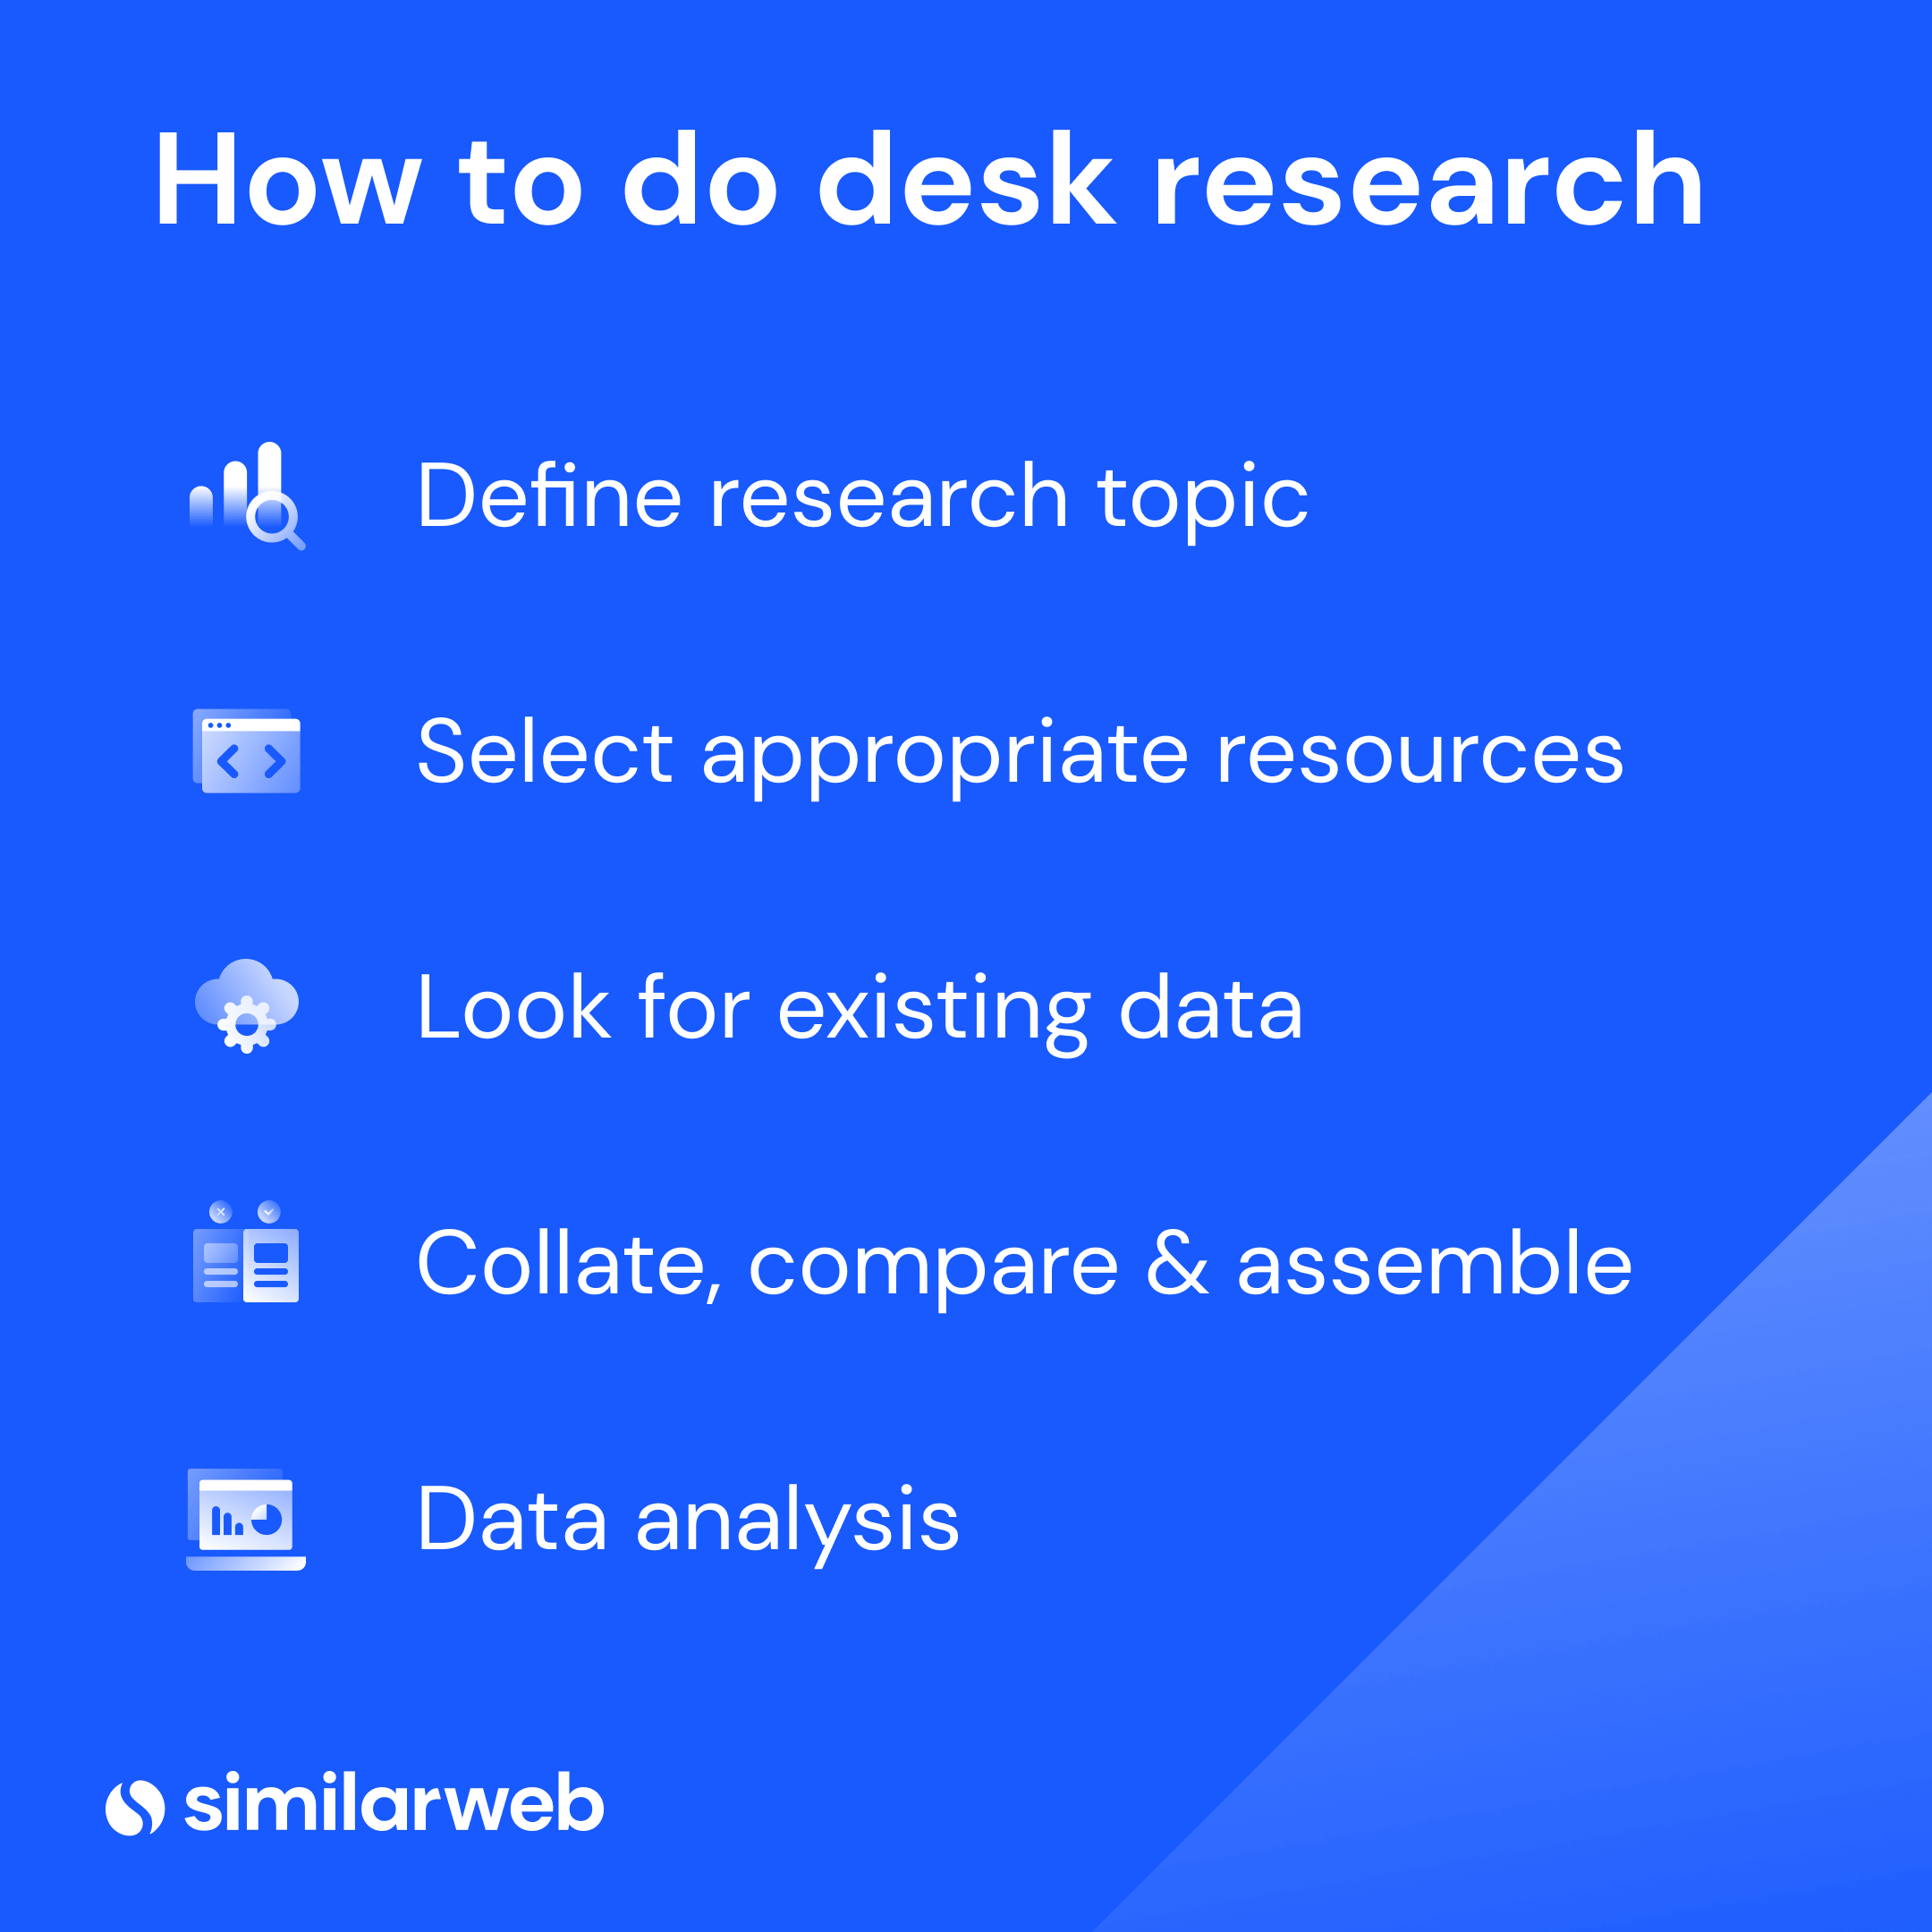 How to do desk research